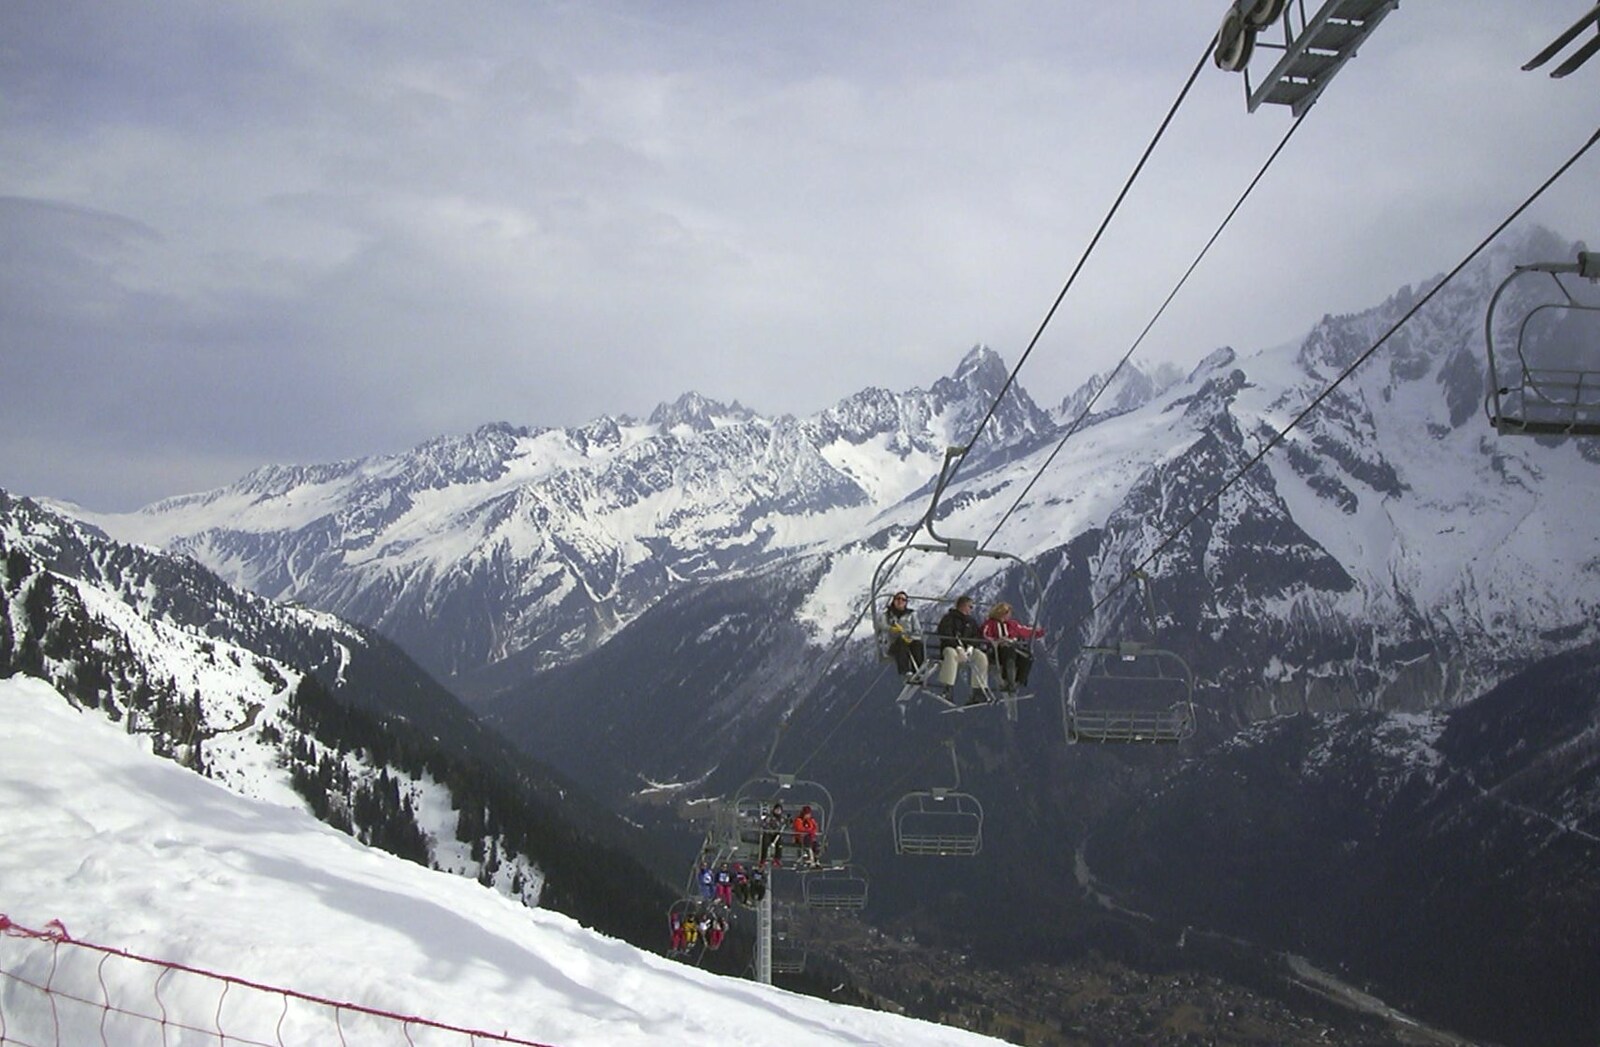 The ski lifts from 3G Lab Goes Skiing In Chamonix, France - 12th March 2002